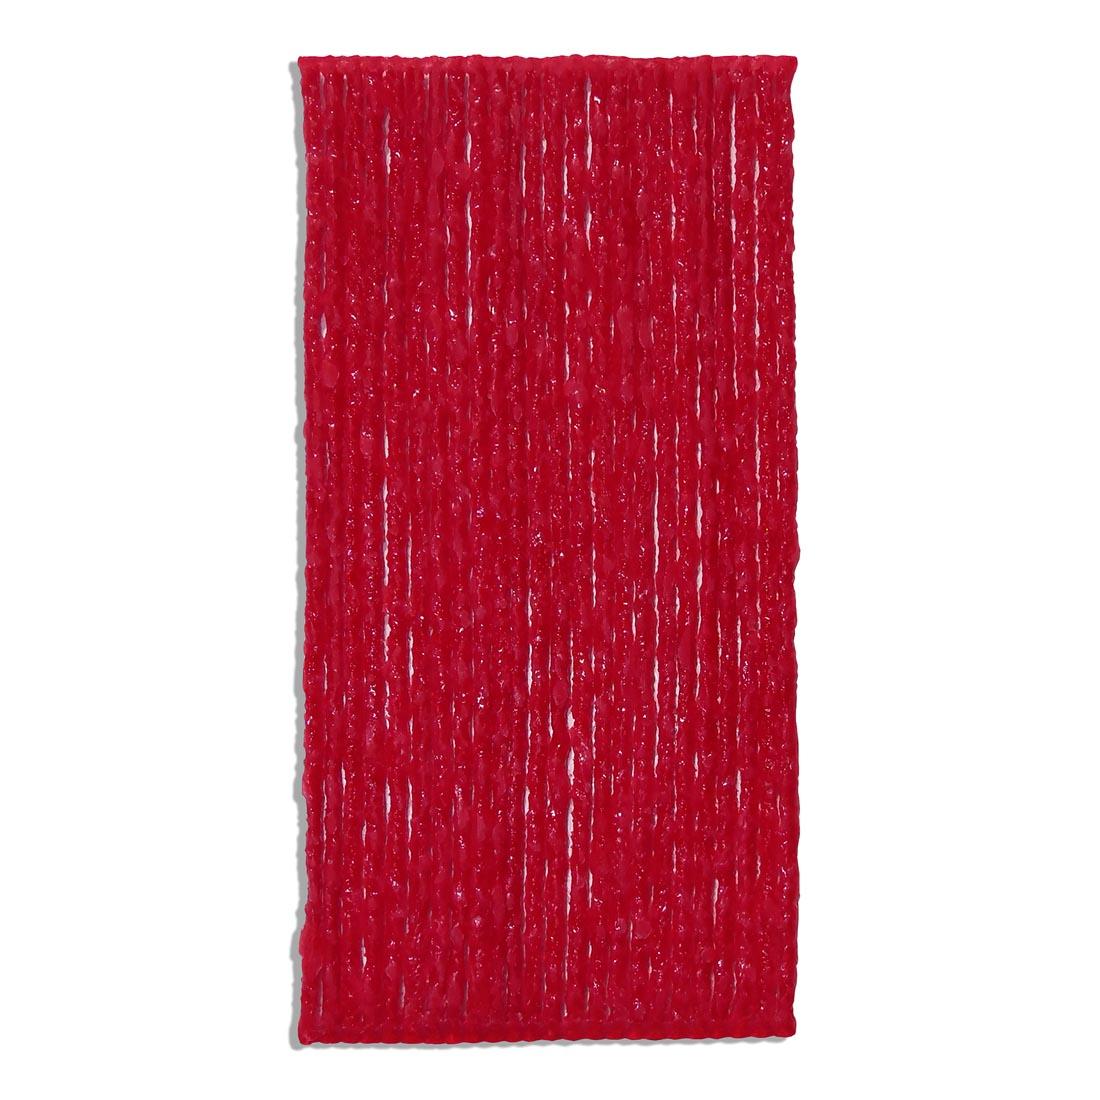 yarn pieces coated with red wax